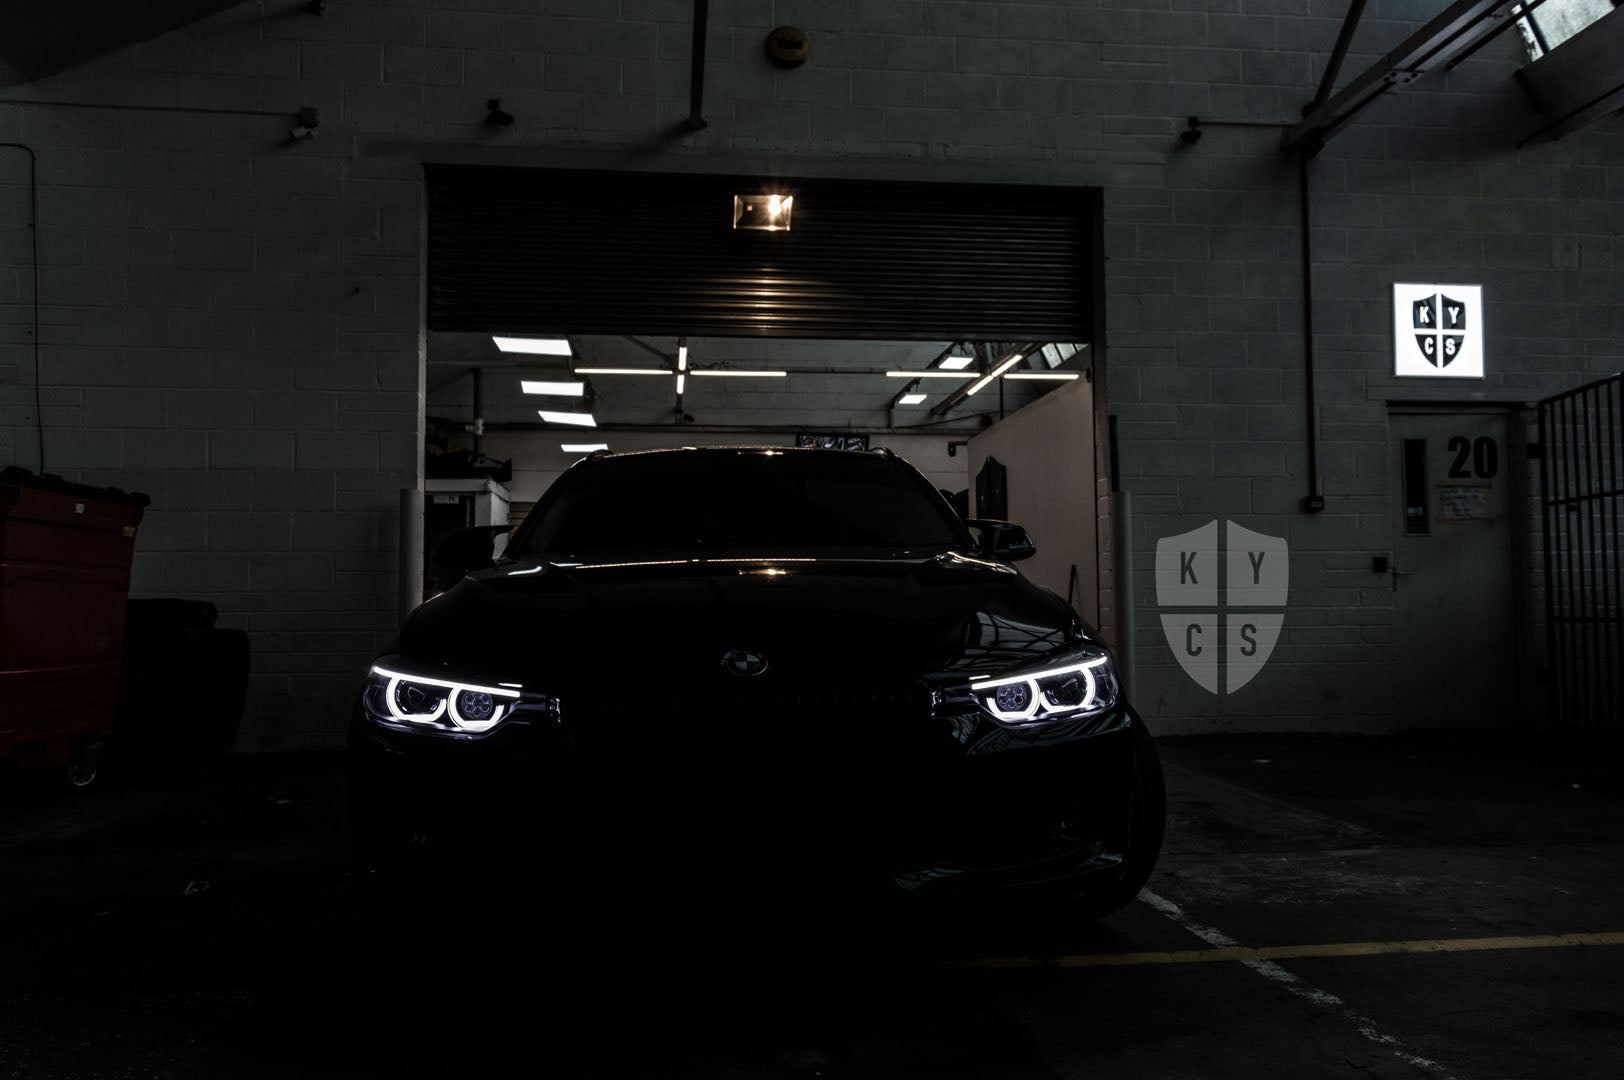 Select the following options to get the same headlights pictured above: BavGruppe Design 3/4 DTM Angel Eyes (White) | Modern Blackout Paintwork | Bi-LED 2.5" Projector With LED Bulb | High Beam LED Unit (Array Style) | LED Eyebrow Strip (Switchback) | New Lenses | LED Indicators